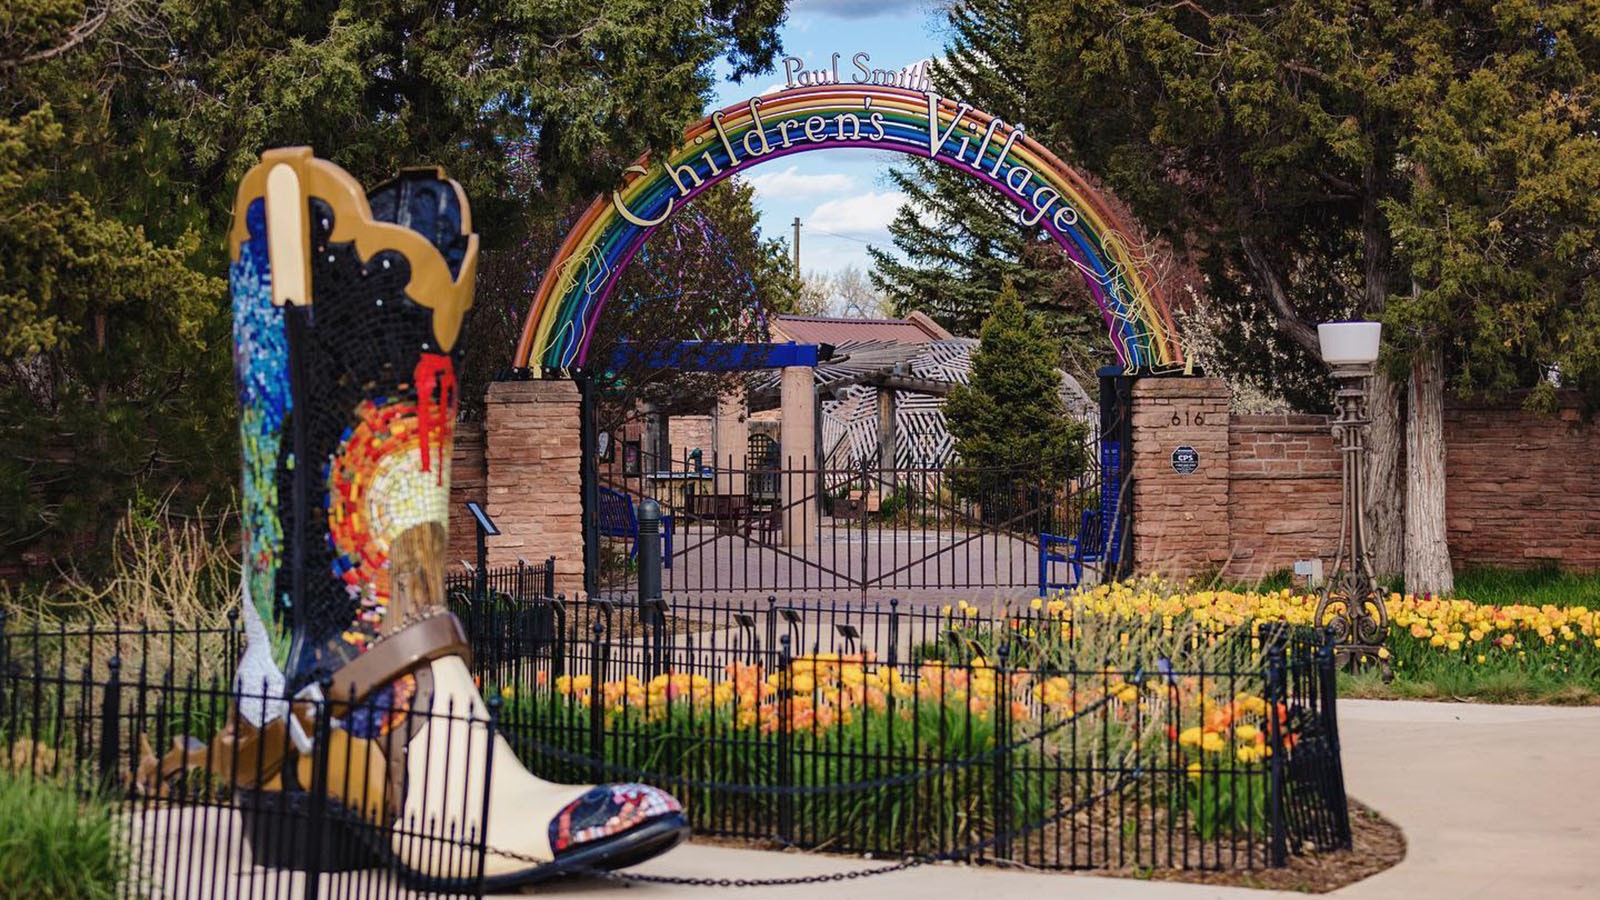 The Paul Smith Children's Village at the Cheyenne Botanic Gardens will be the new home for the Hitching Post Inn sign.